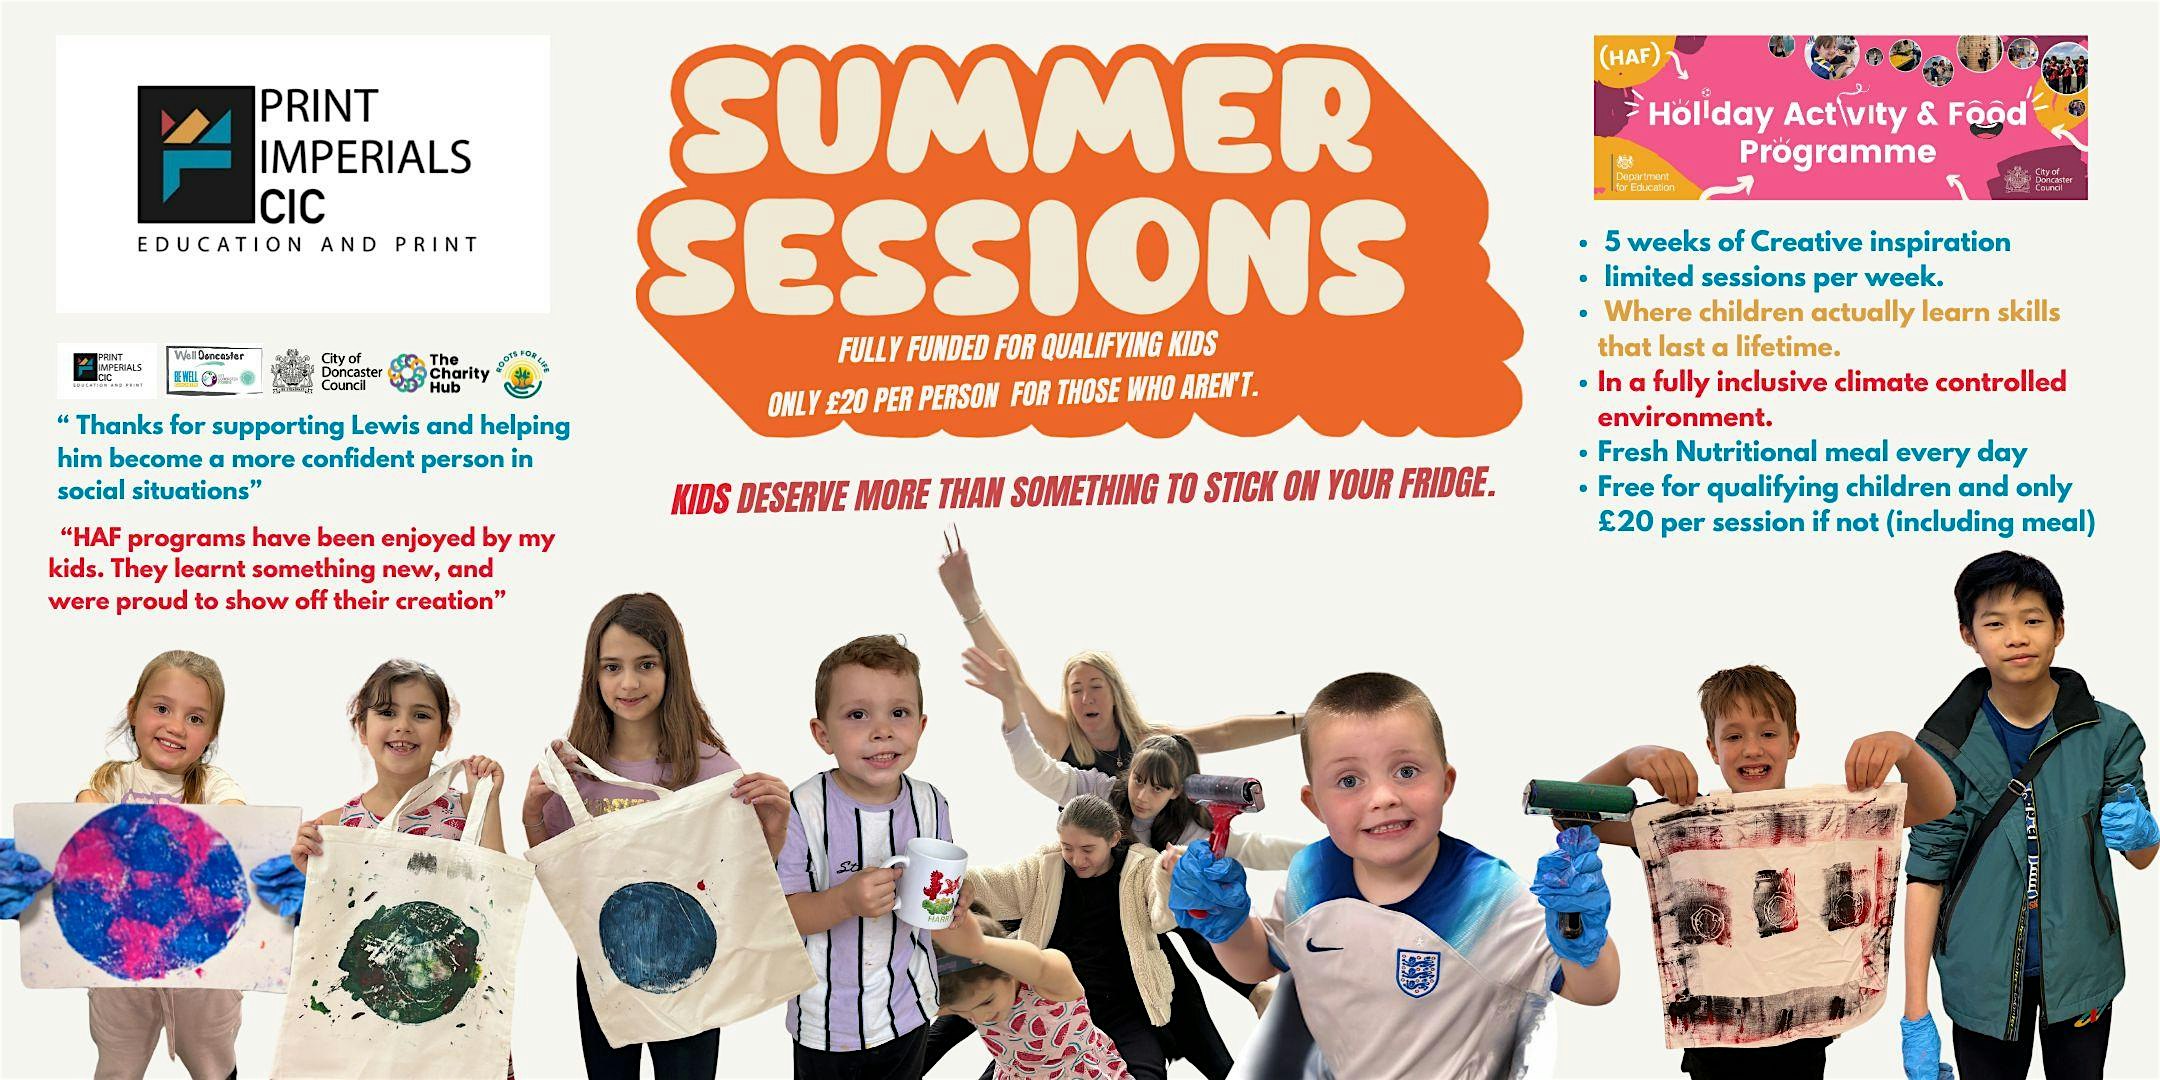 SUMMER SESSIONS AT C-View